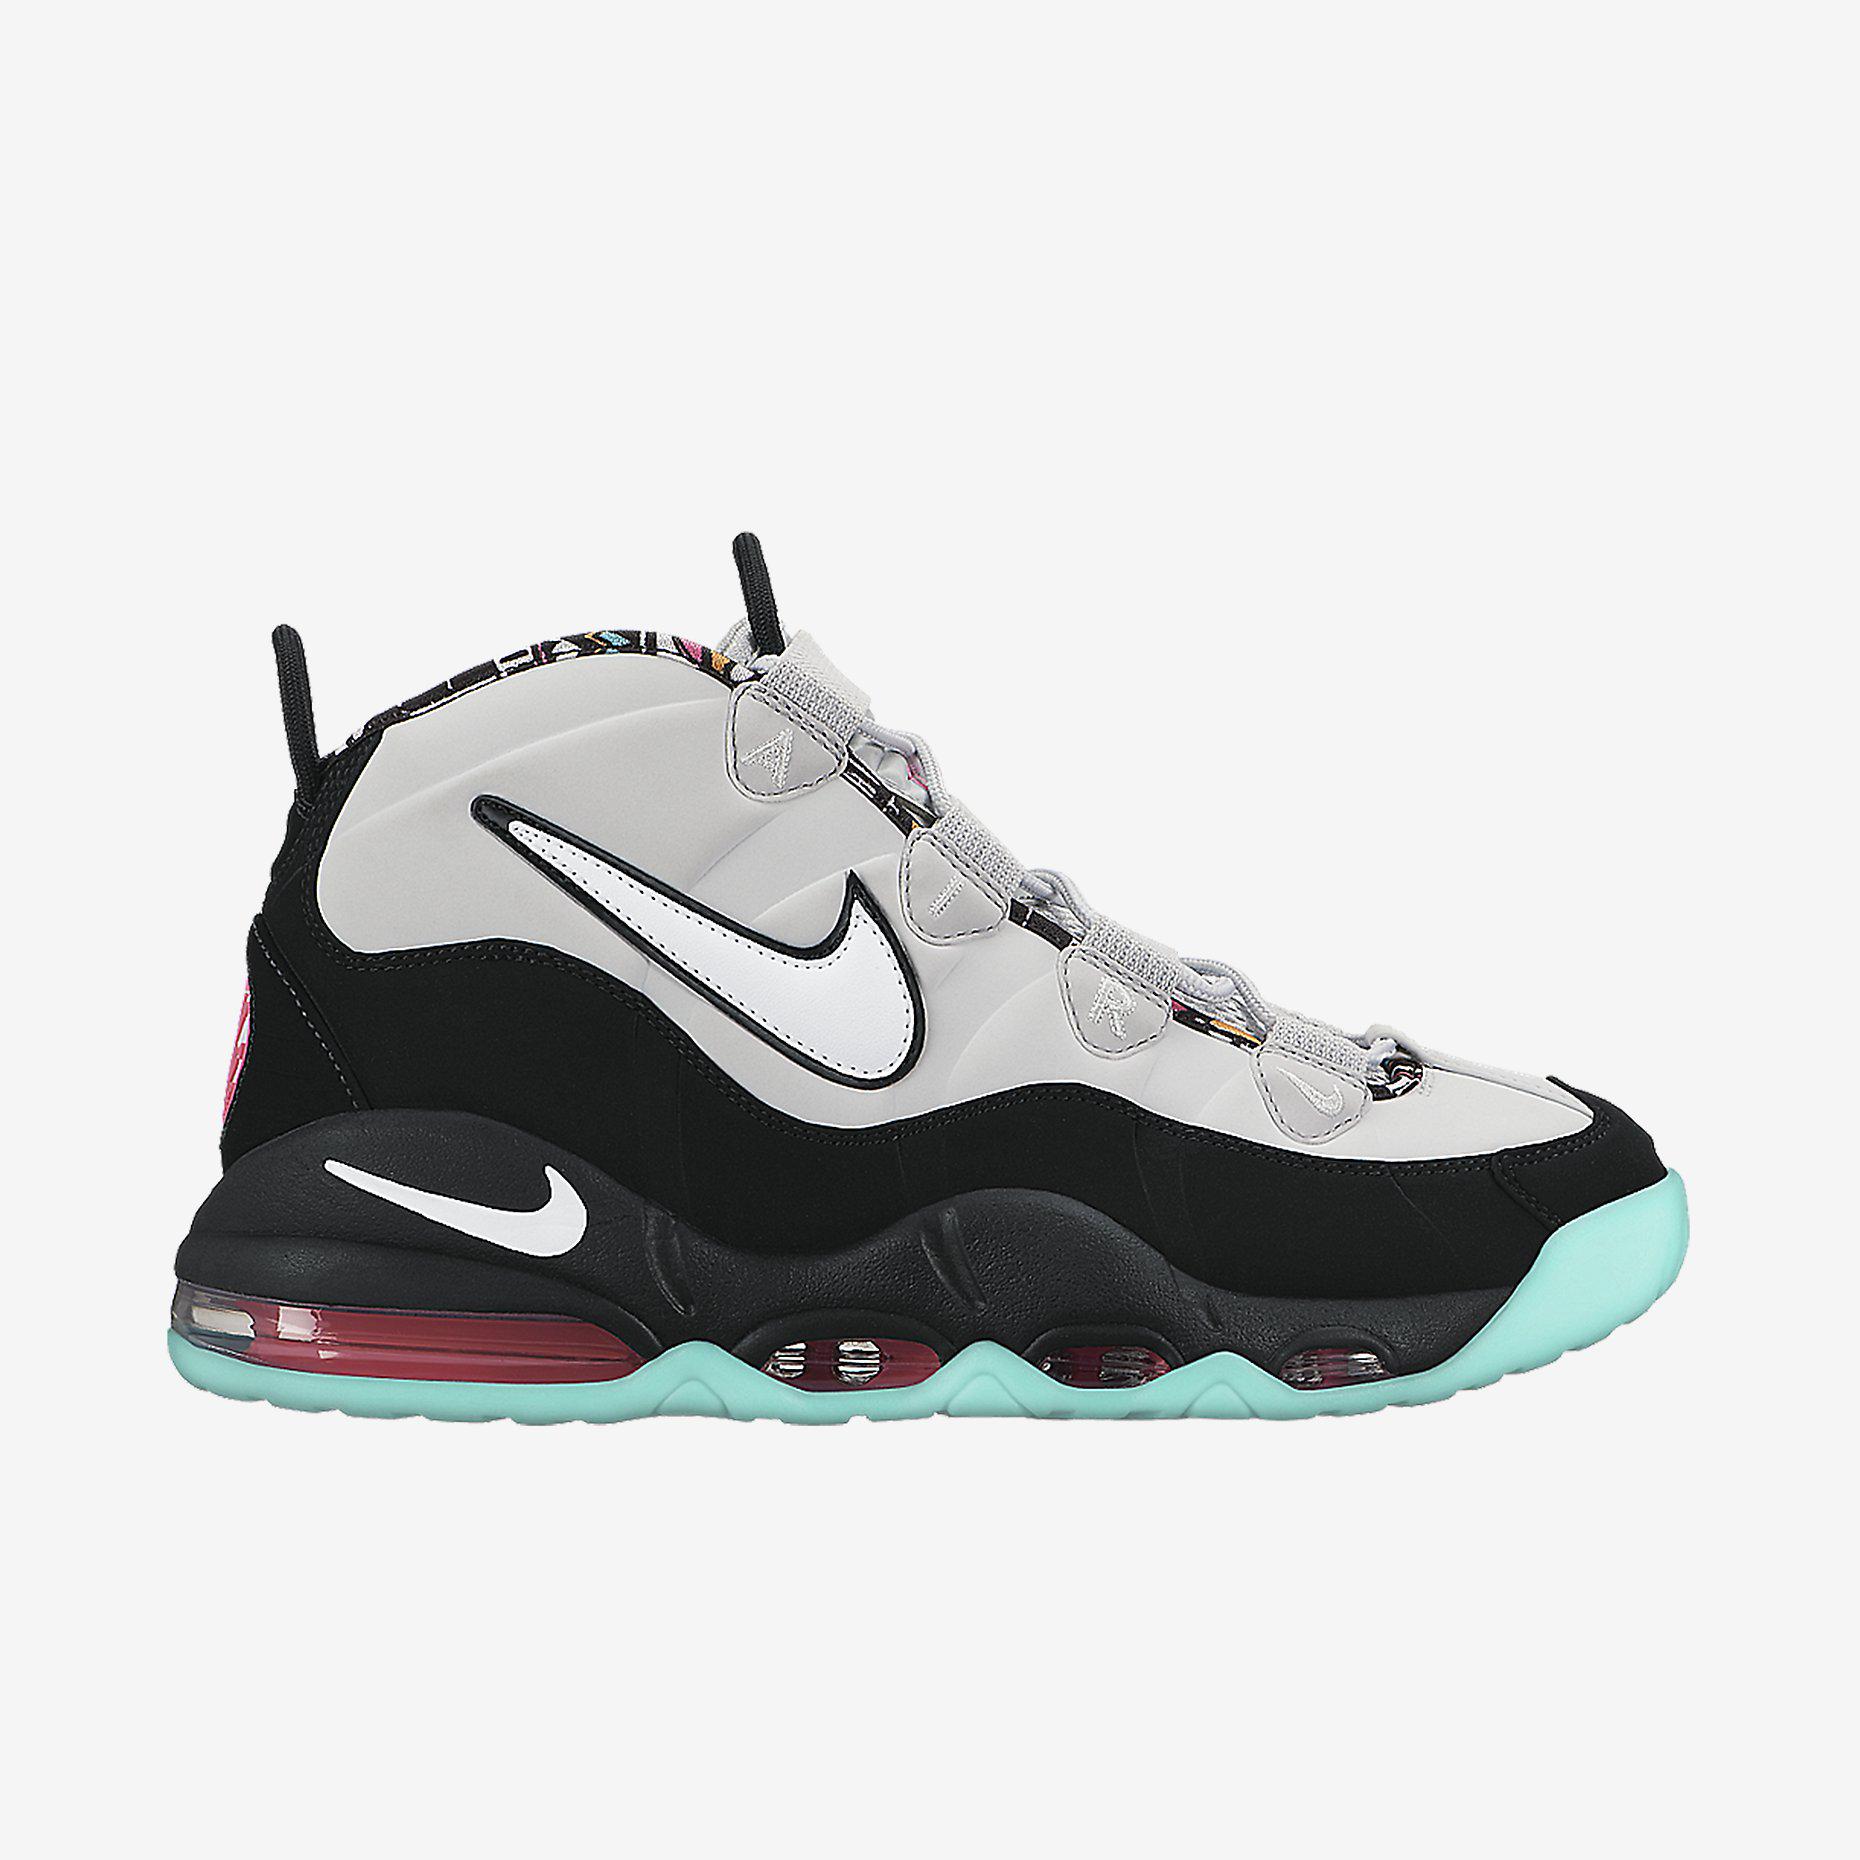 DTLR Twitter: "New Arrival: Nike Air Max Uptempo (Black/White-Light Pink) http://t.co/4XI8GYGMBr http://t.co/IQpZNlPE06" / Twitter